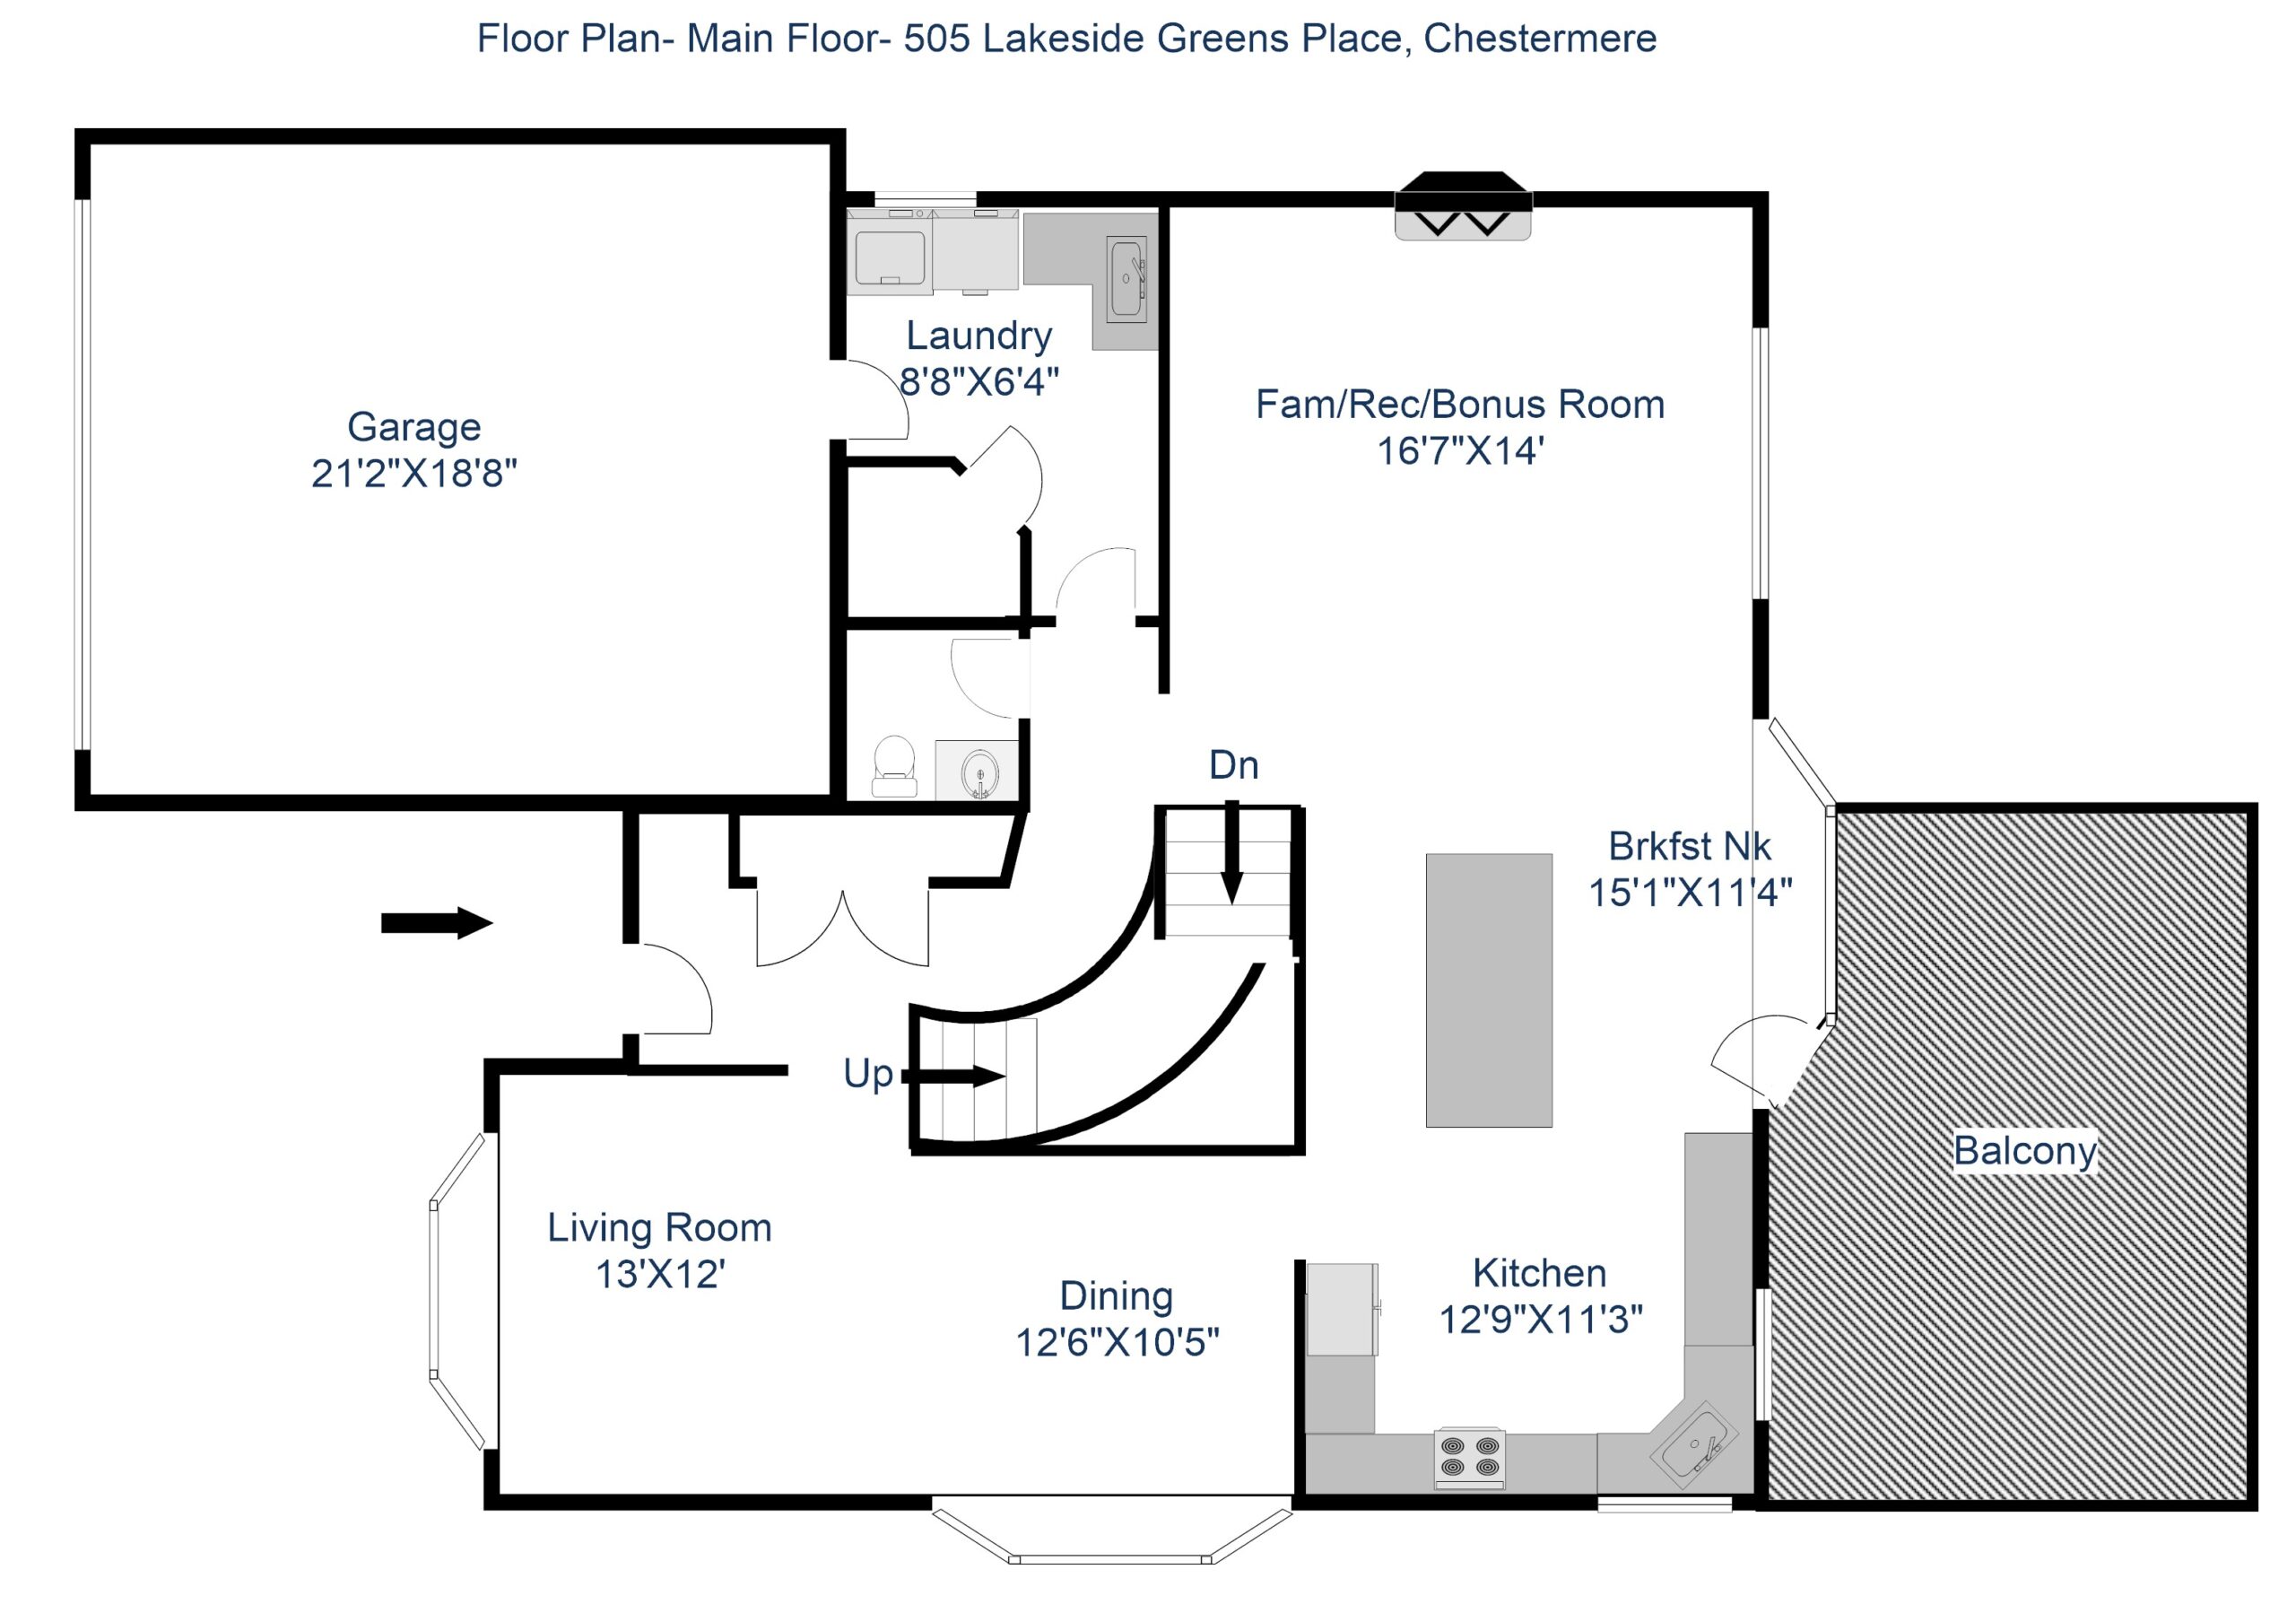 505 Lakeside<br />
Greens Place Floor Plan